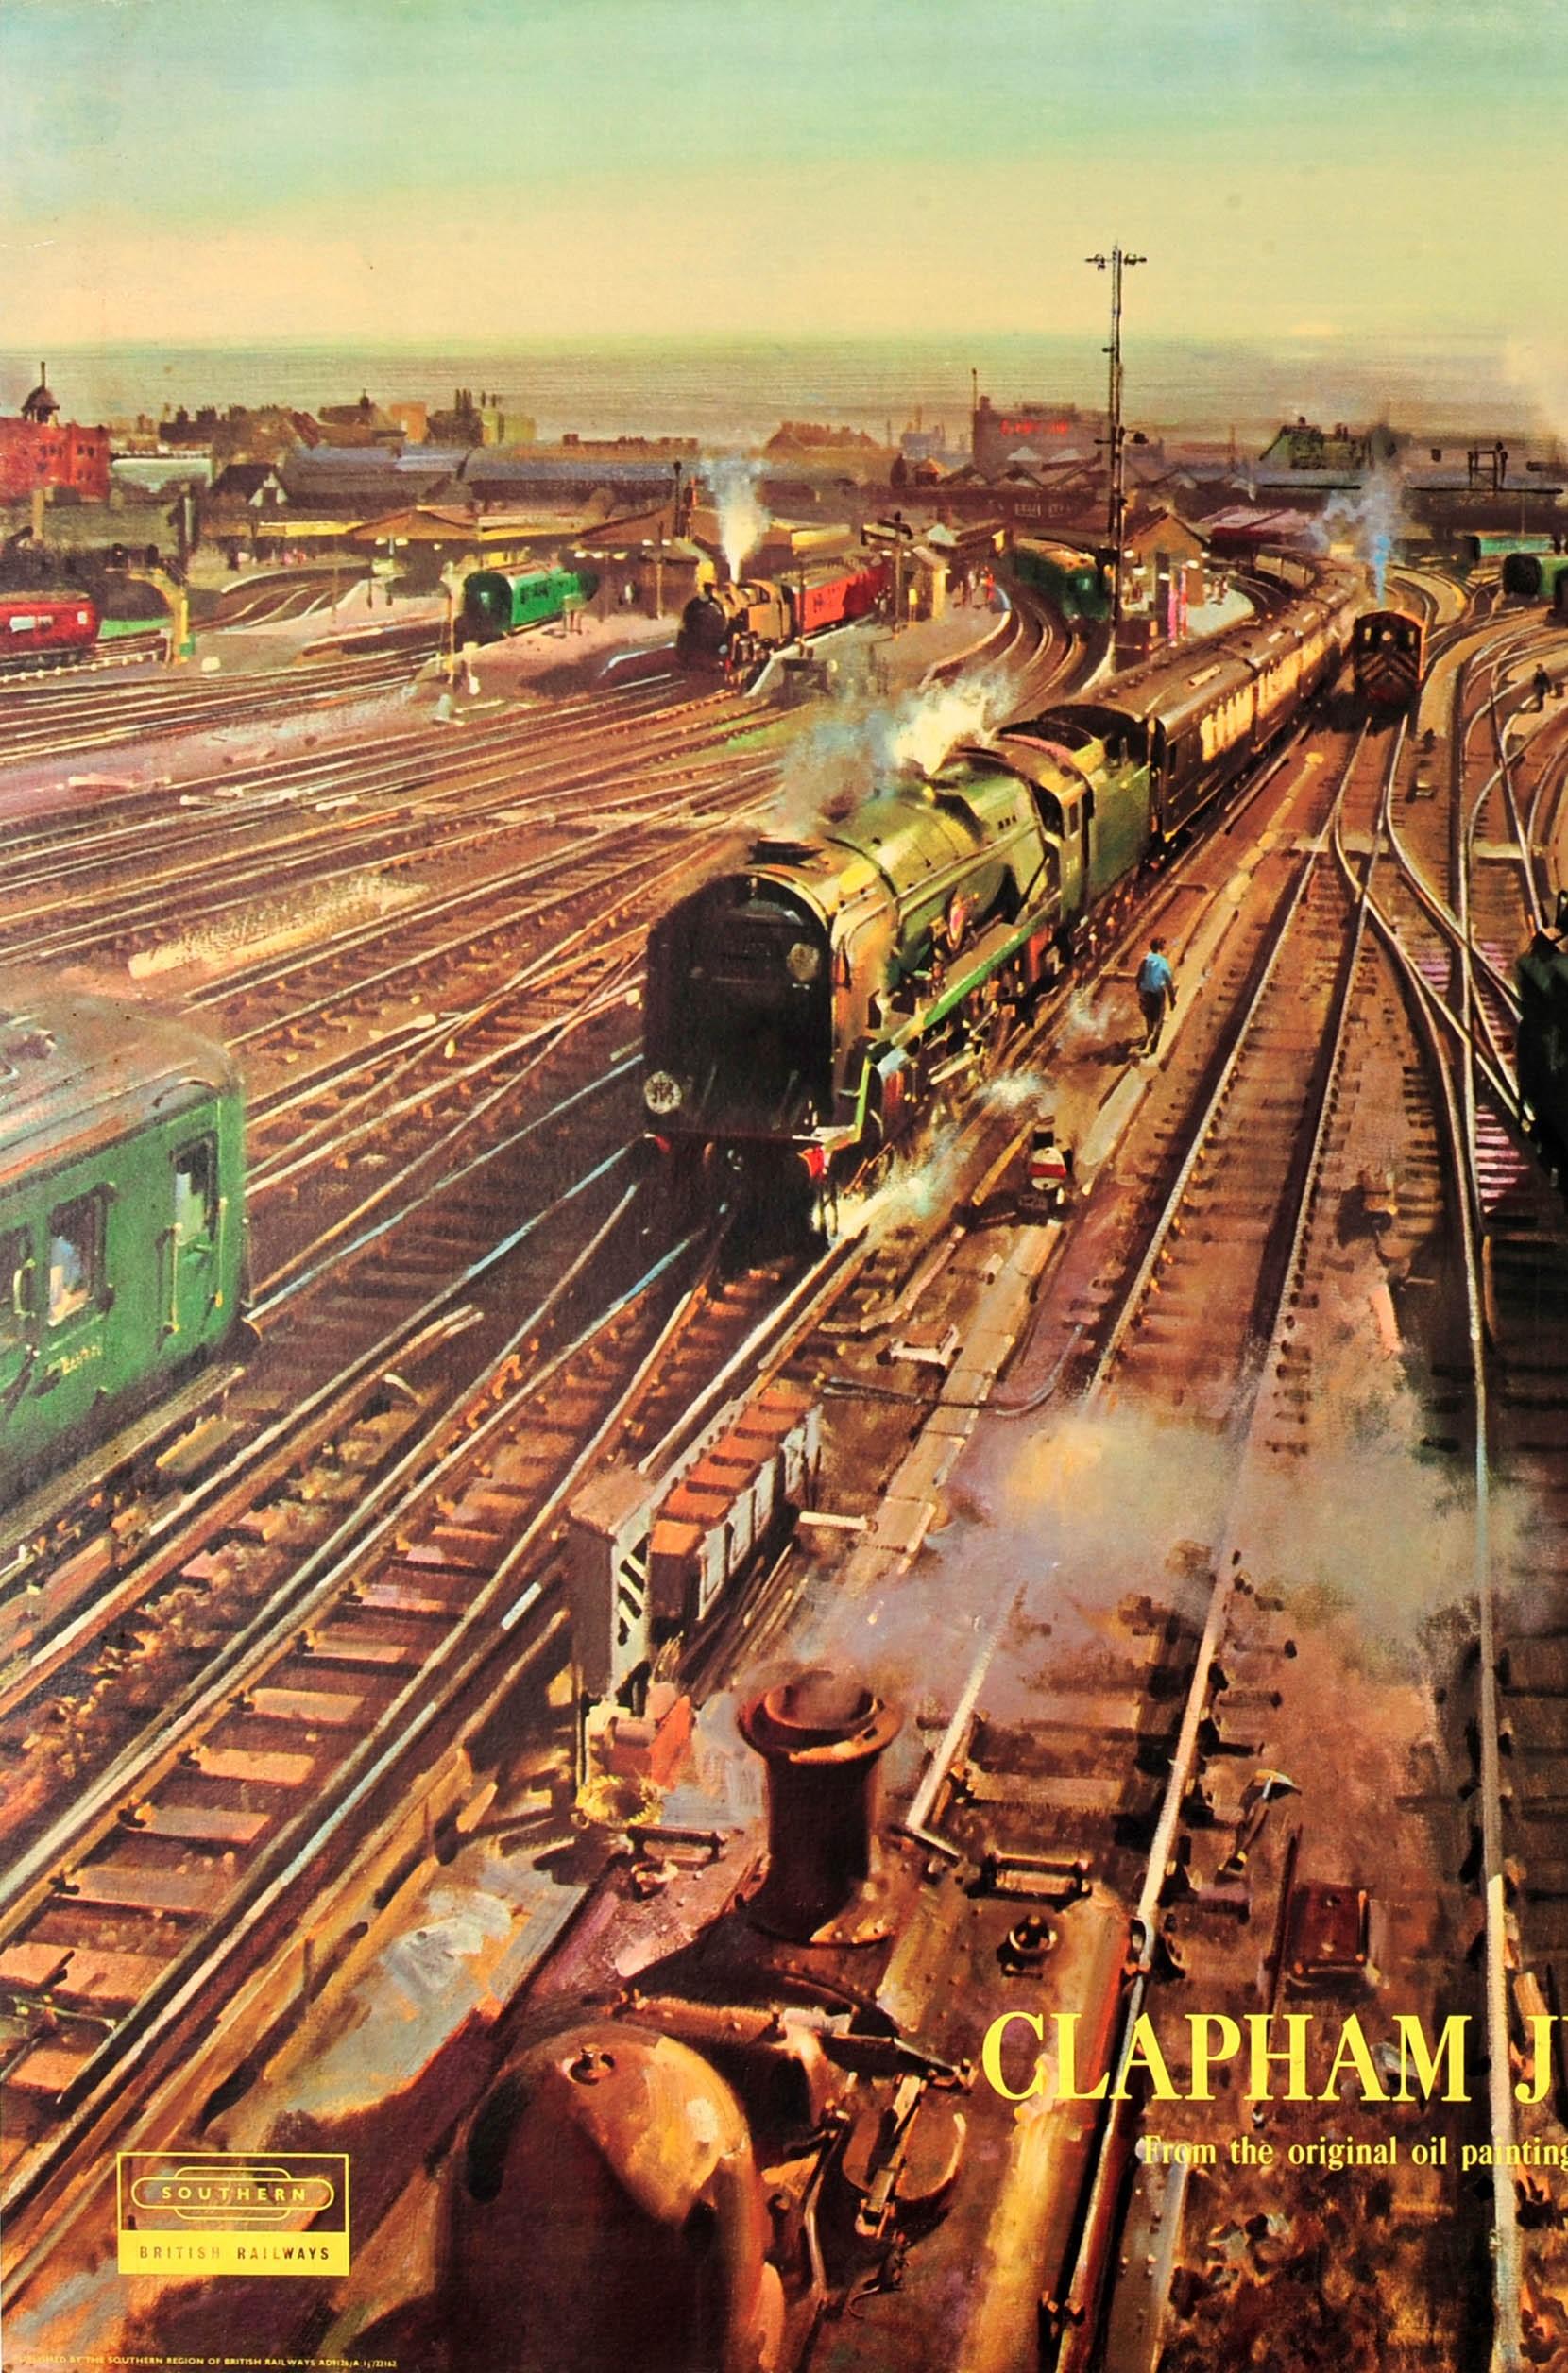 Original vintage railway travel advertising poster entitled Clapham Junction from the original oil painting by Terence Cuneo featuring Britain's busiest railway station with numerous trains making their way in and out of the busy London interchange